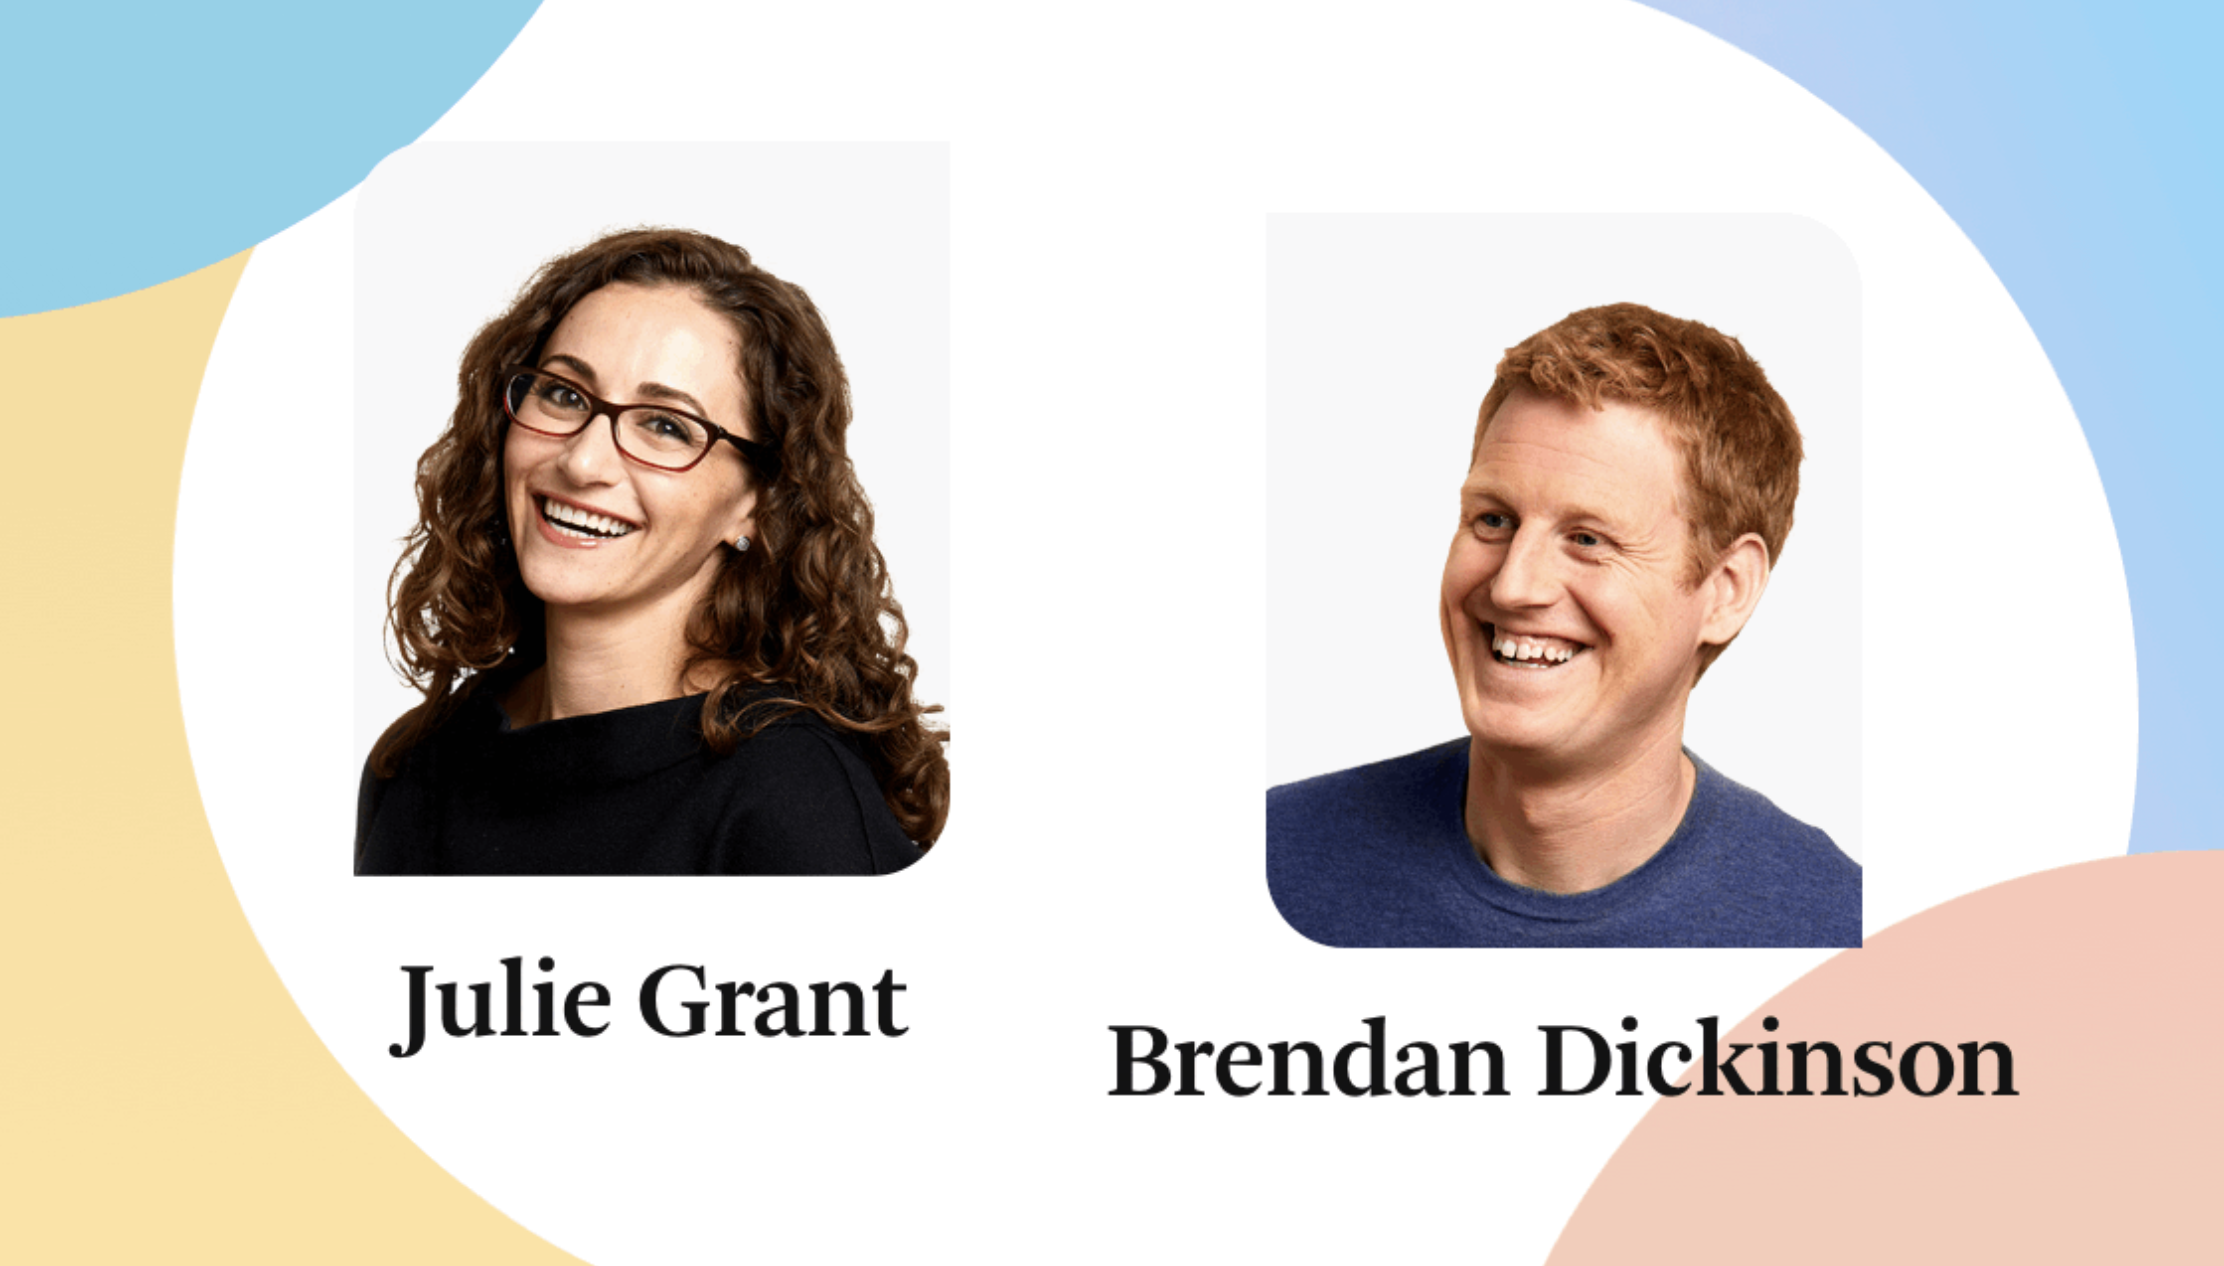 Growth from within: Brendan Dickinson and Julie Grant promoted to General Partners